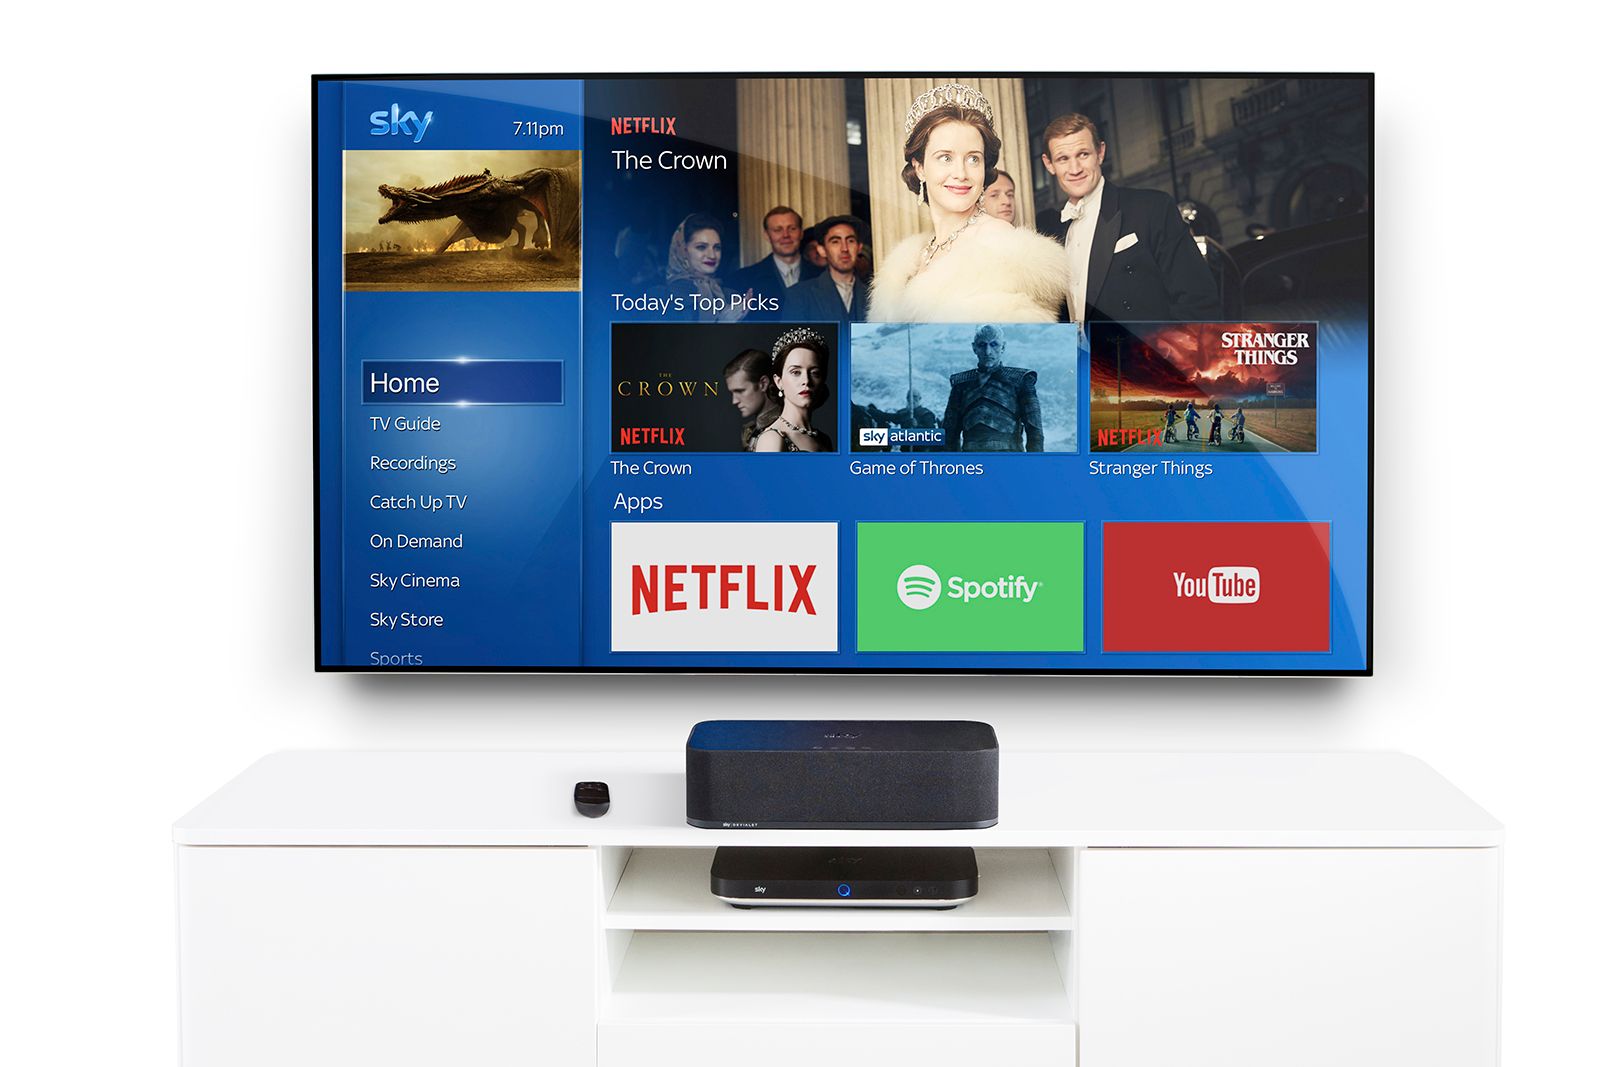 Sky inks deal with Netflix to keep the streaming service on Sky Q image 1